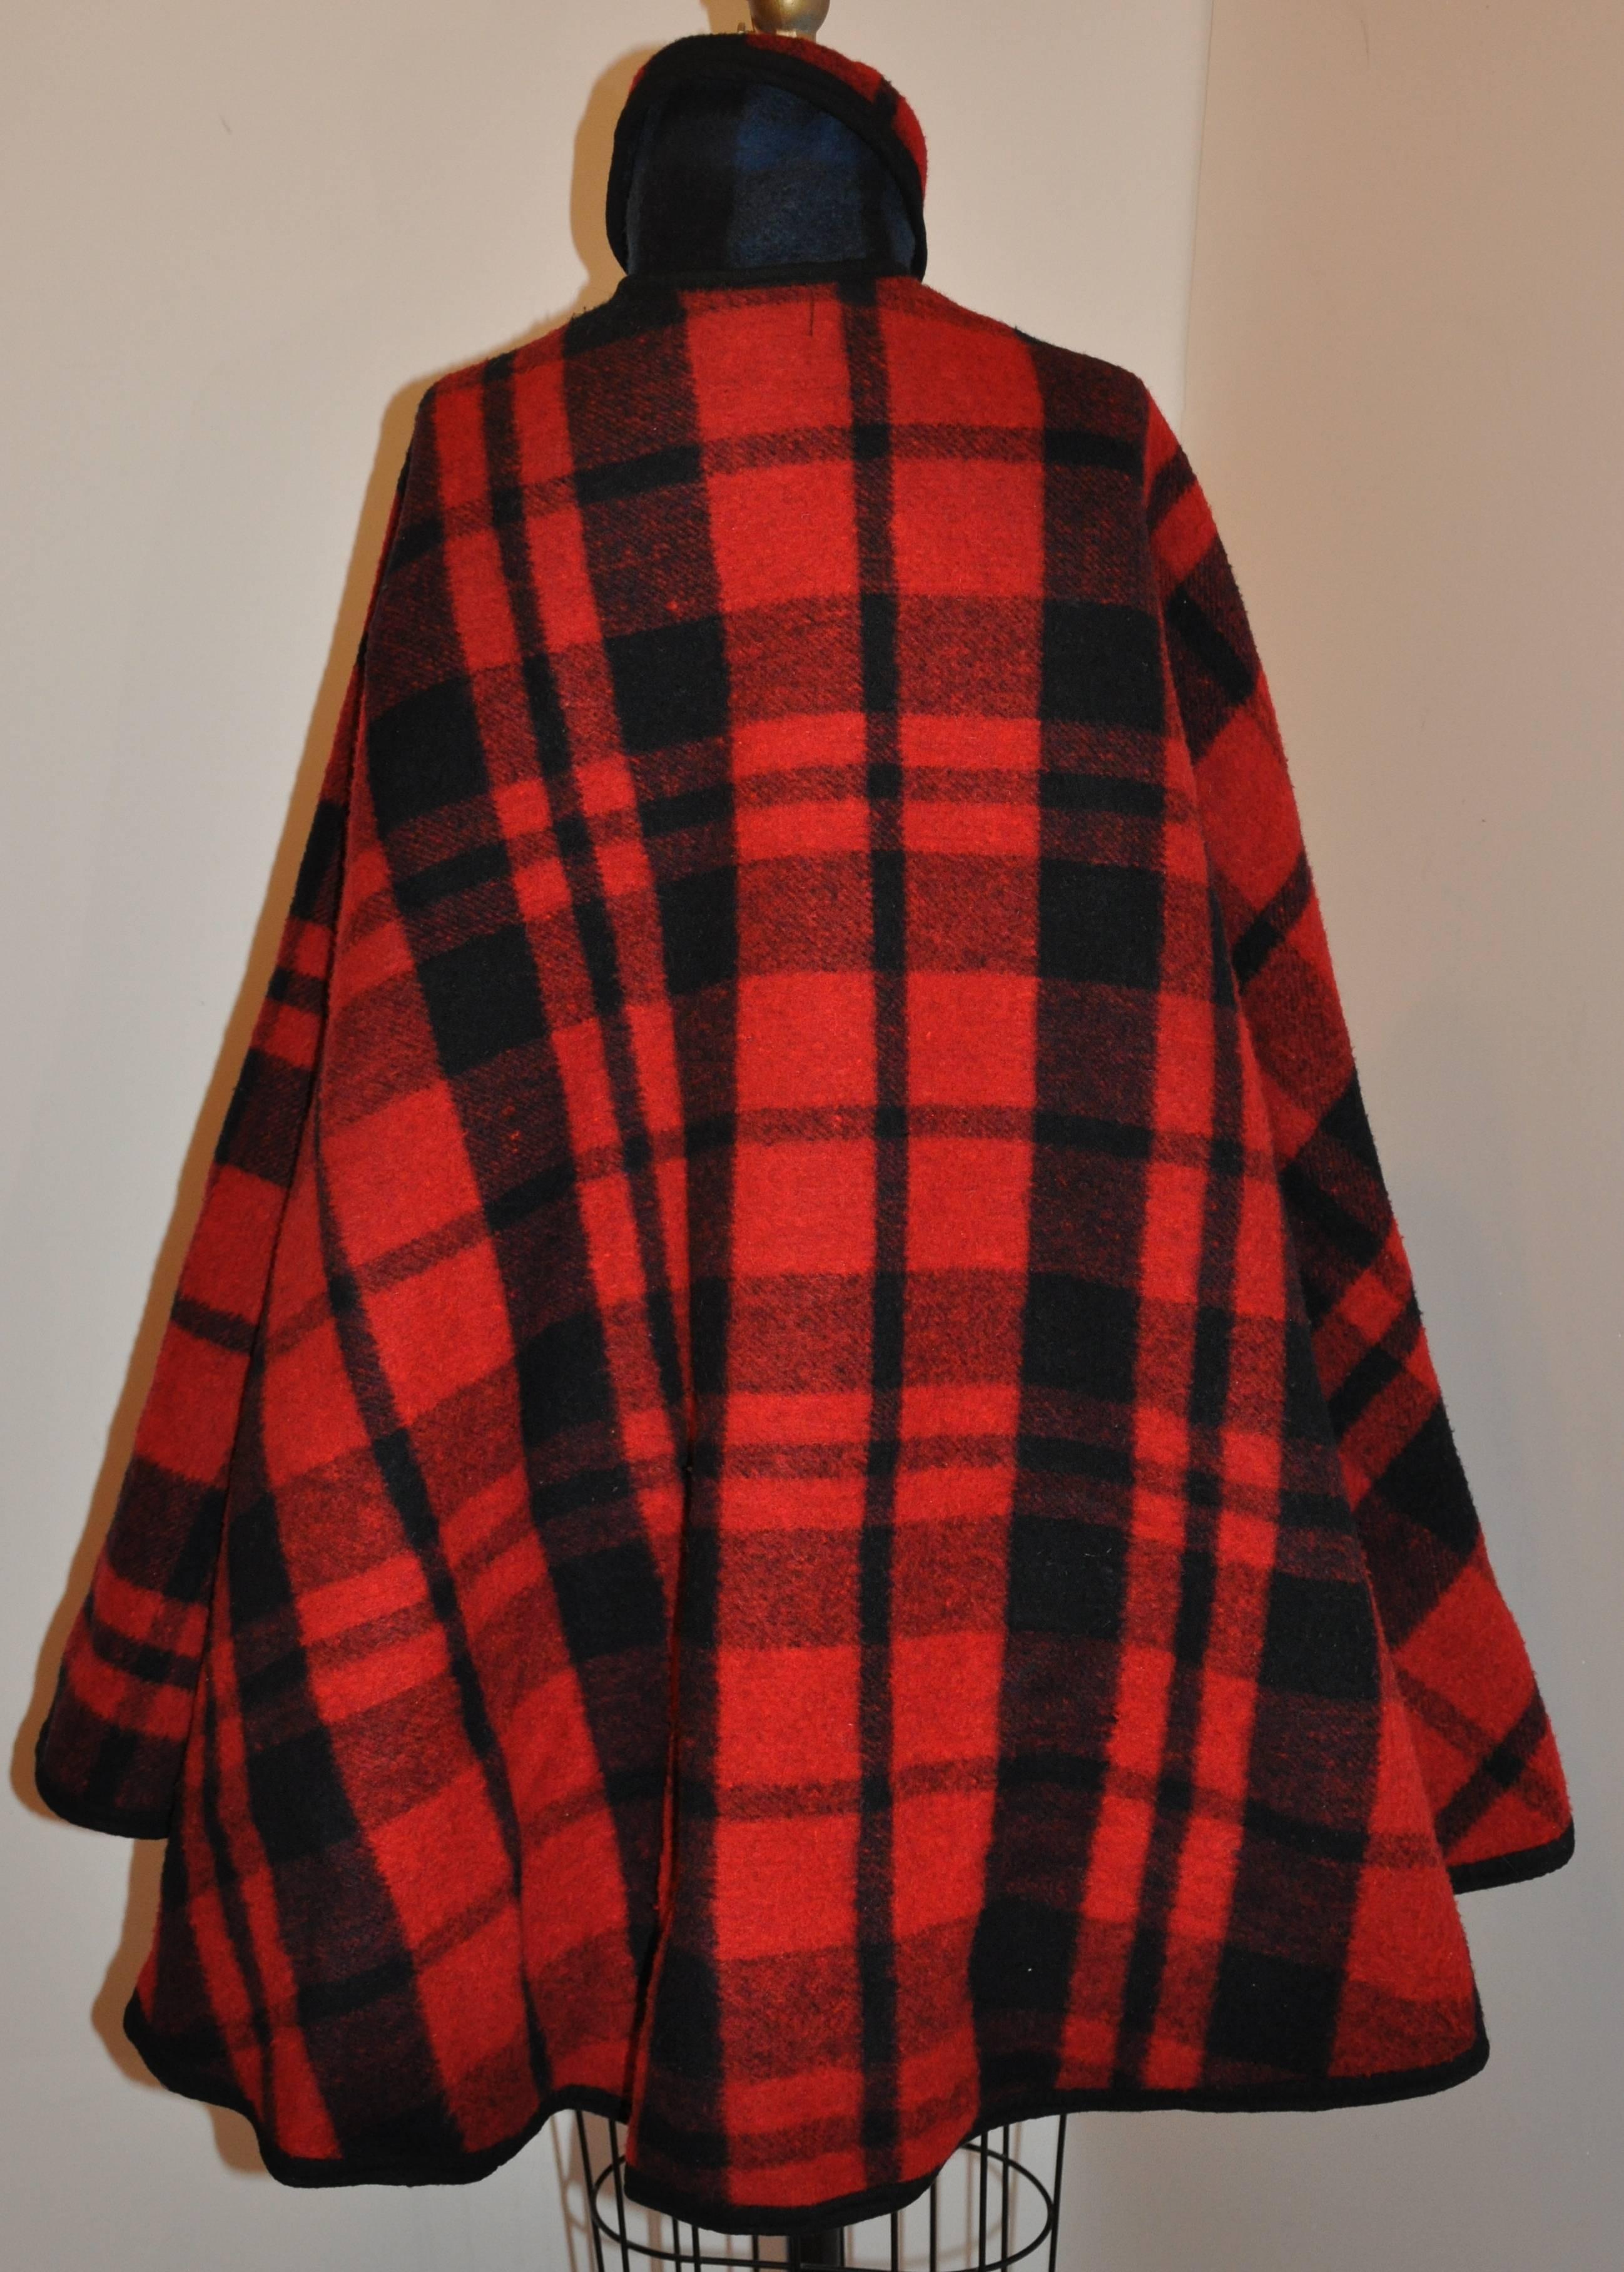           Pendleton's wonderful double-faced reversible plaid poncho makes for a wonderful two-in-one poncho. One side is combined with red & black plaid, with the other side a navy & black plaid. All edges are finished with cording and well